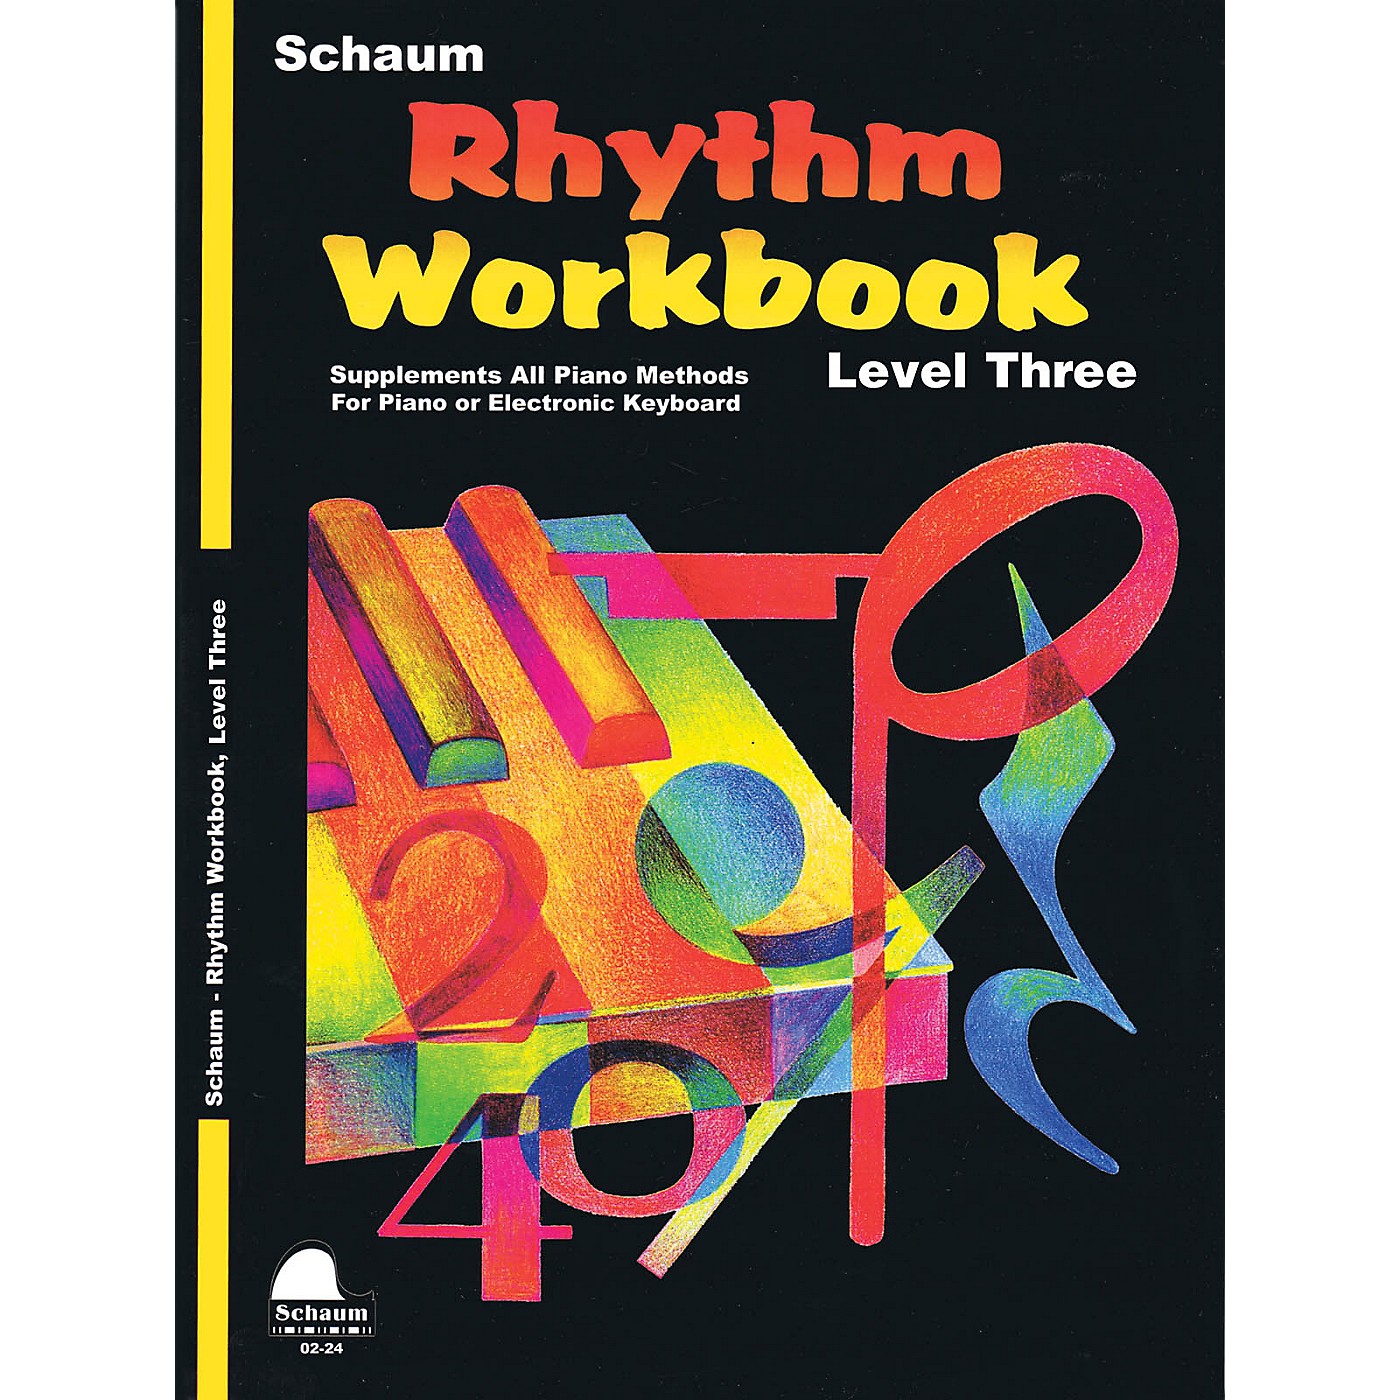 Schaum Rhythm Workbook (Level 3) Educational Piano Book by Wesley Schaum (Level Early Inter) thumbnail